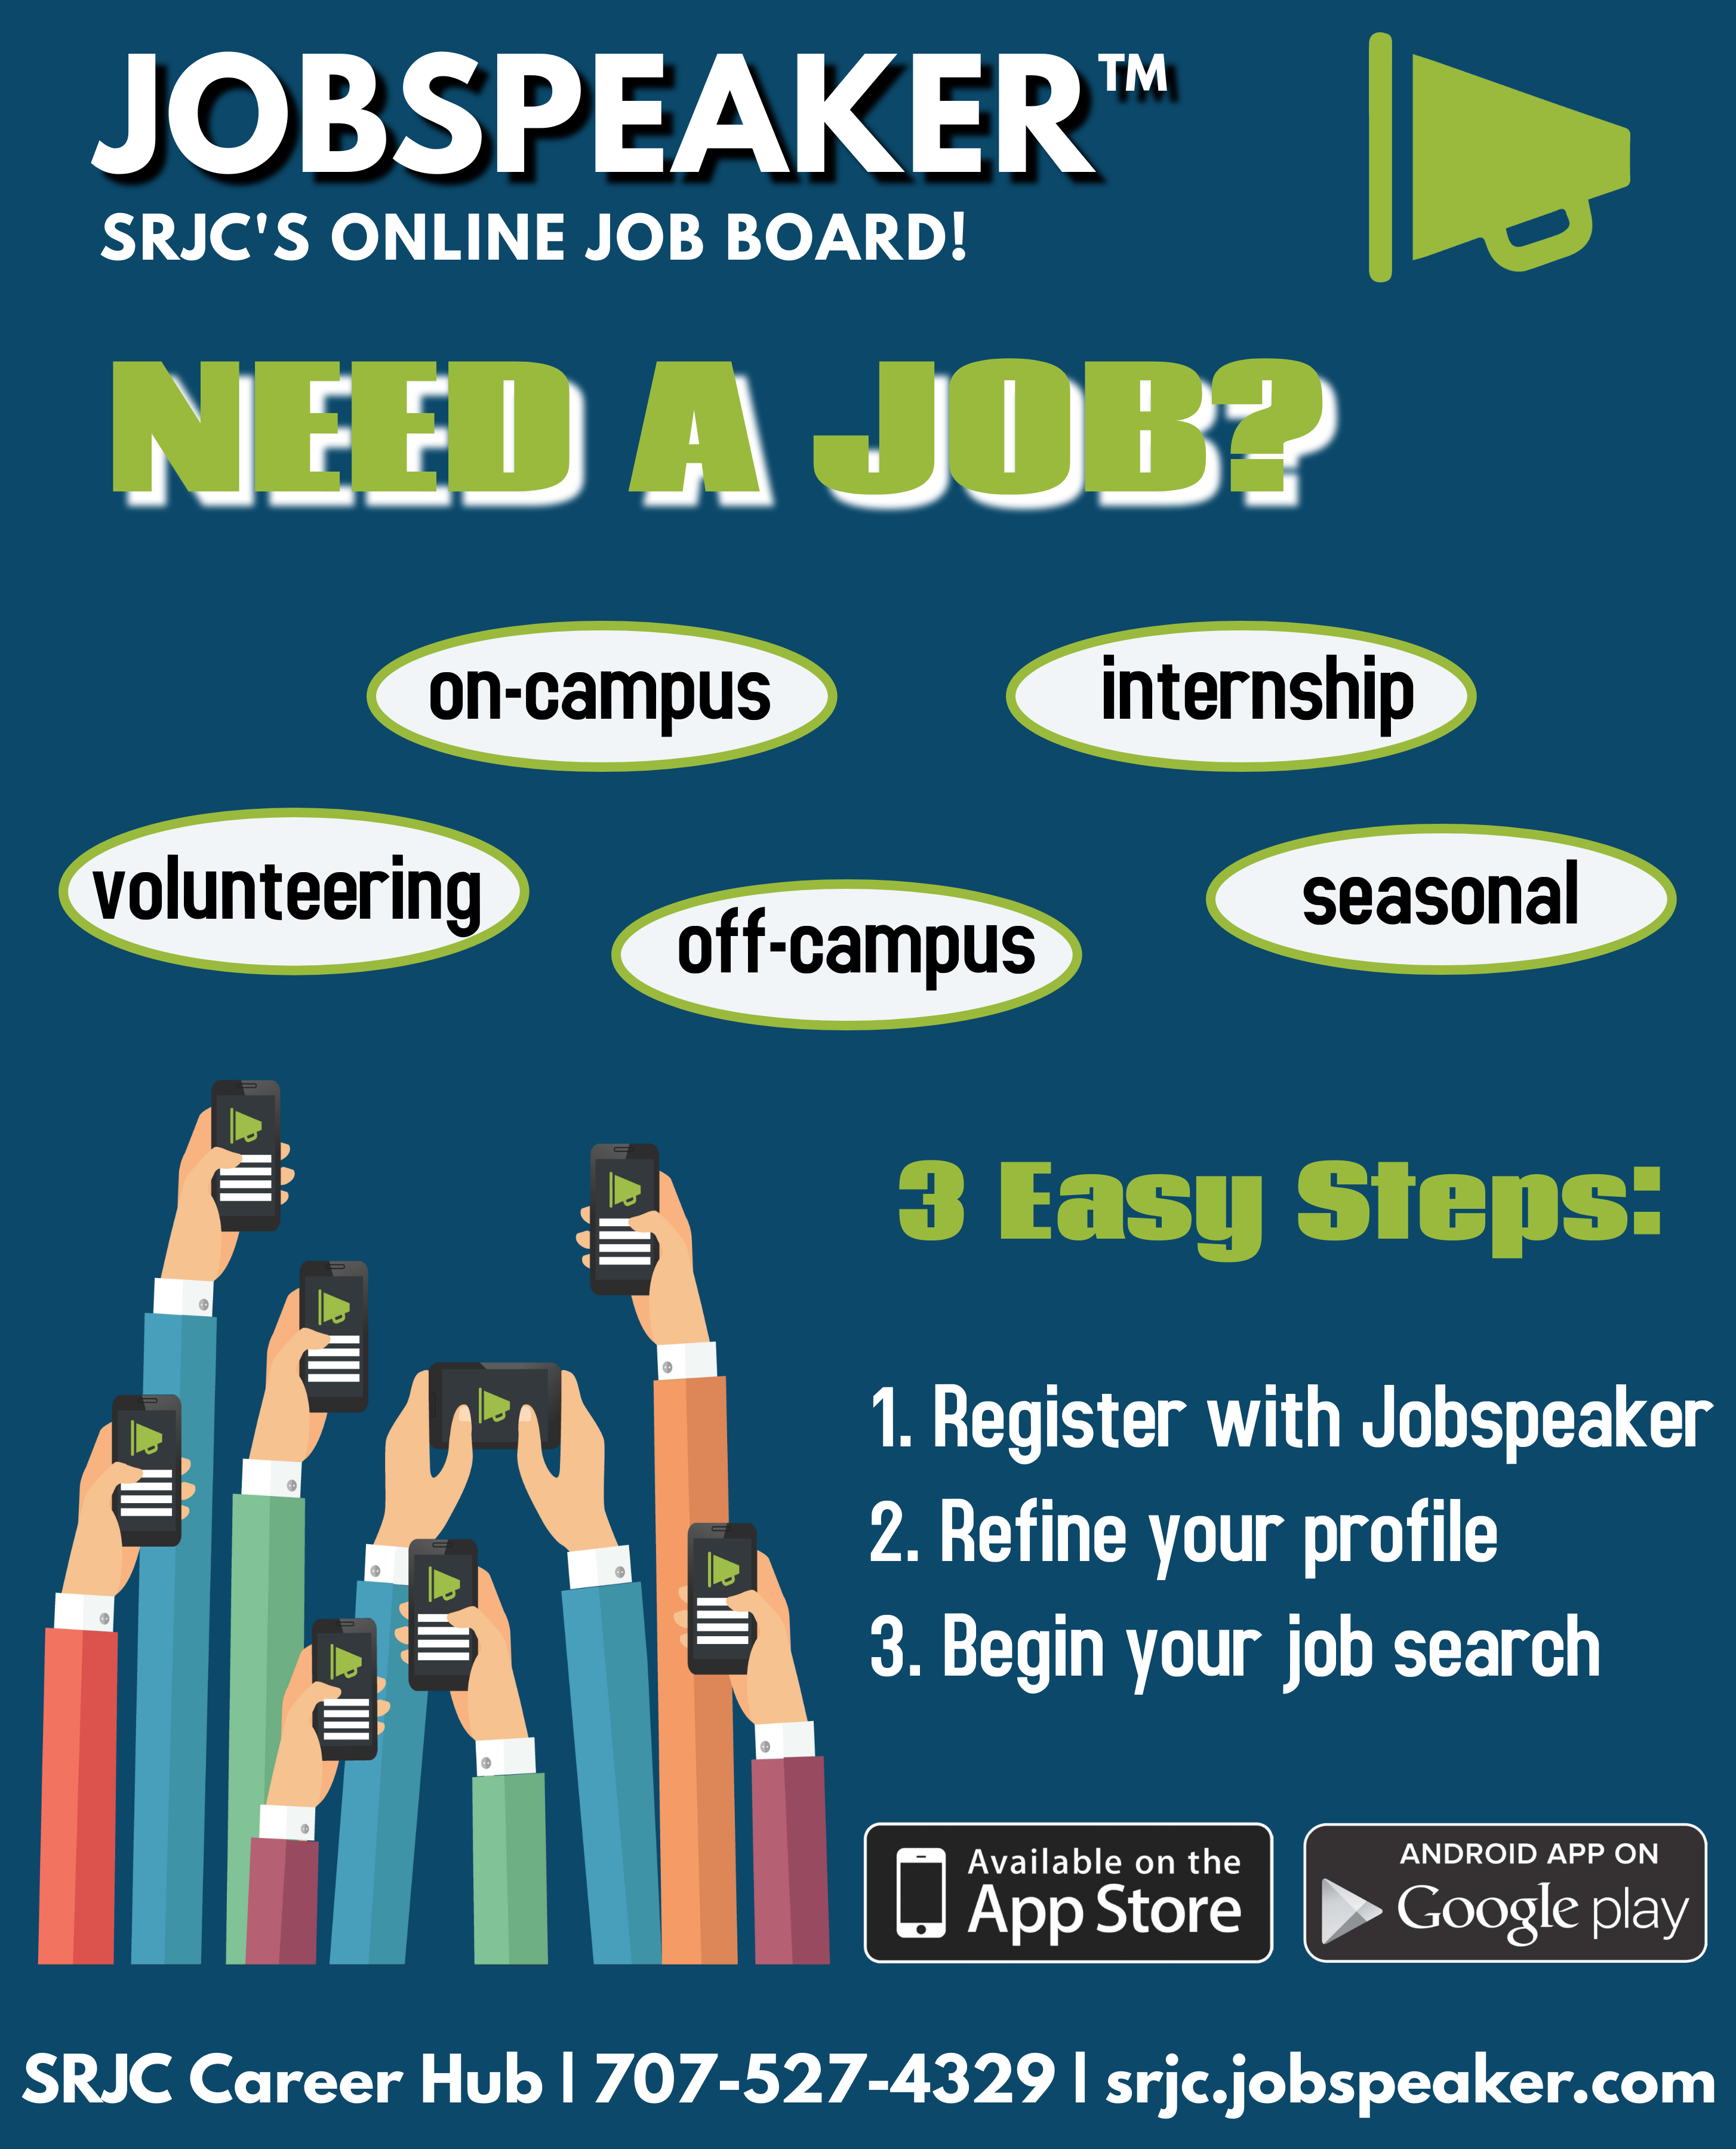 Need a job? Check out Jobspeaker! SRJC's online job board. 3 easy steps: 1. register with Jobspeaker, 2. Refine your profile, 3. begin your search!. caontact career hub at 707*527-4329 or visit srjc.jobspeaker.com